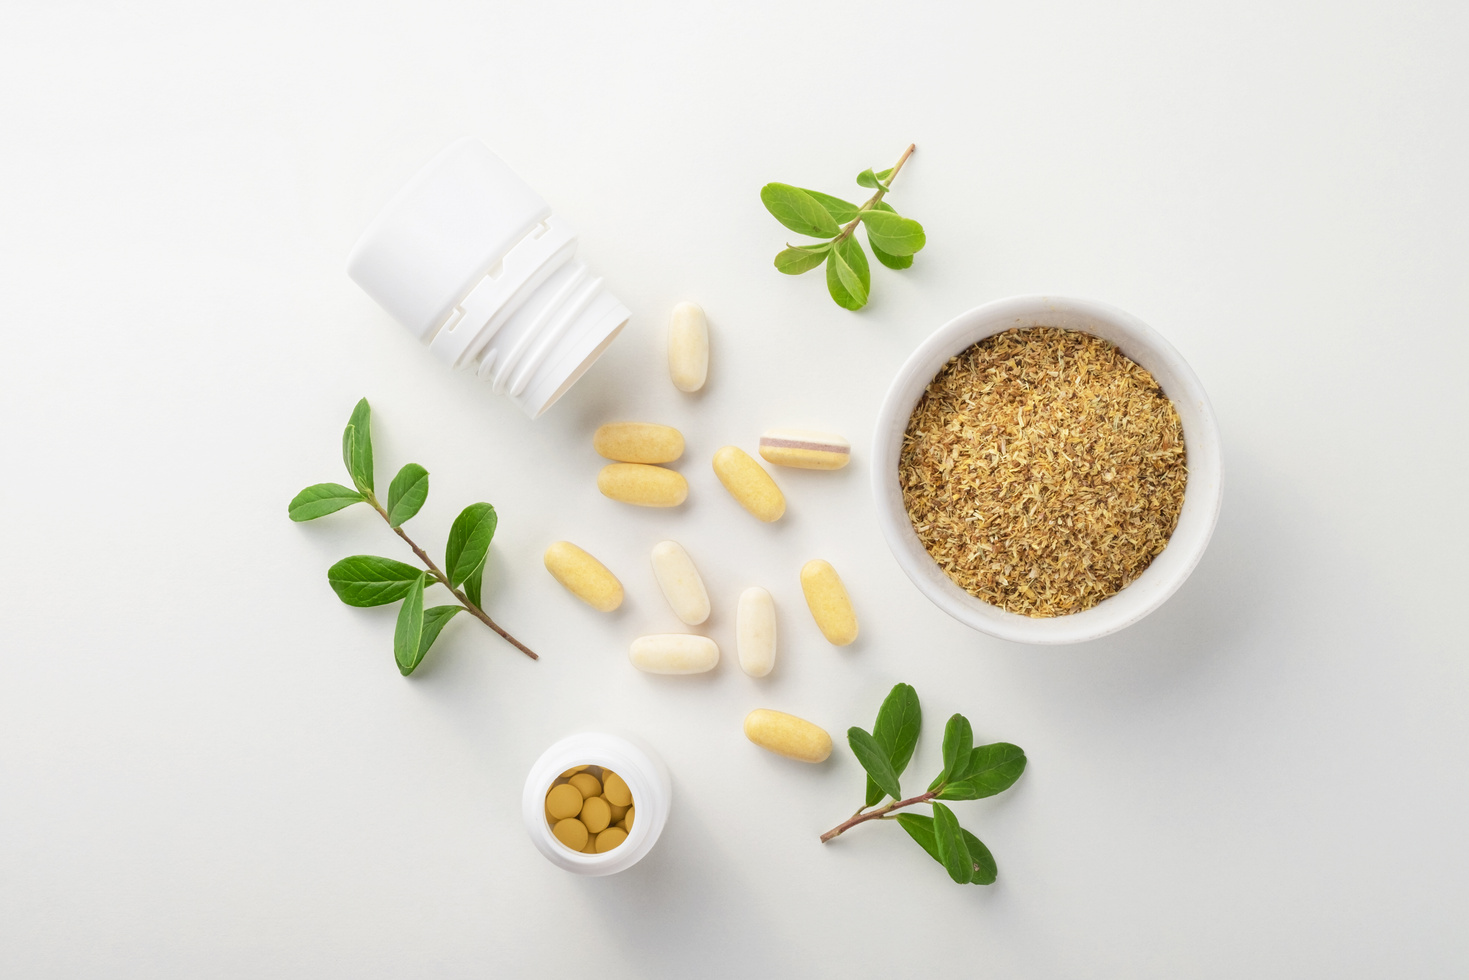 Vitamins and herbal supplements